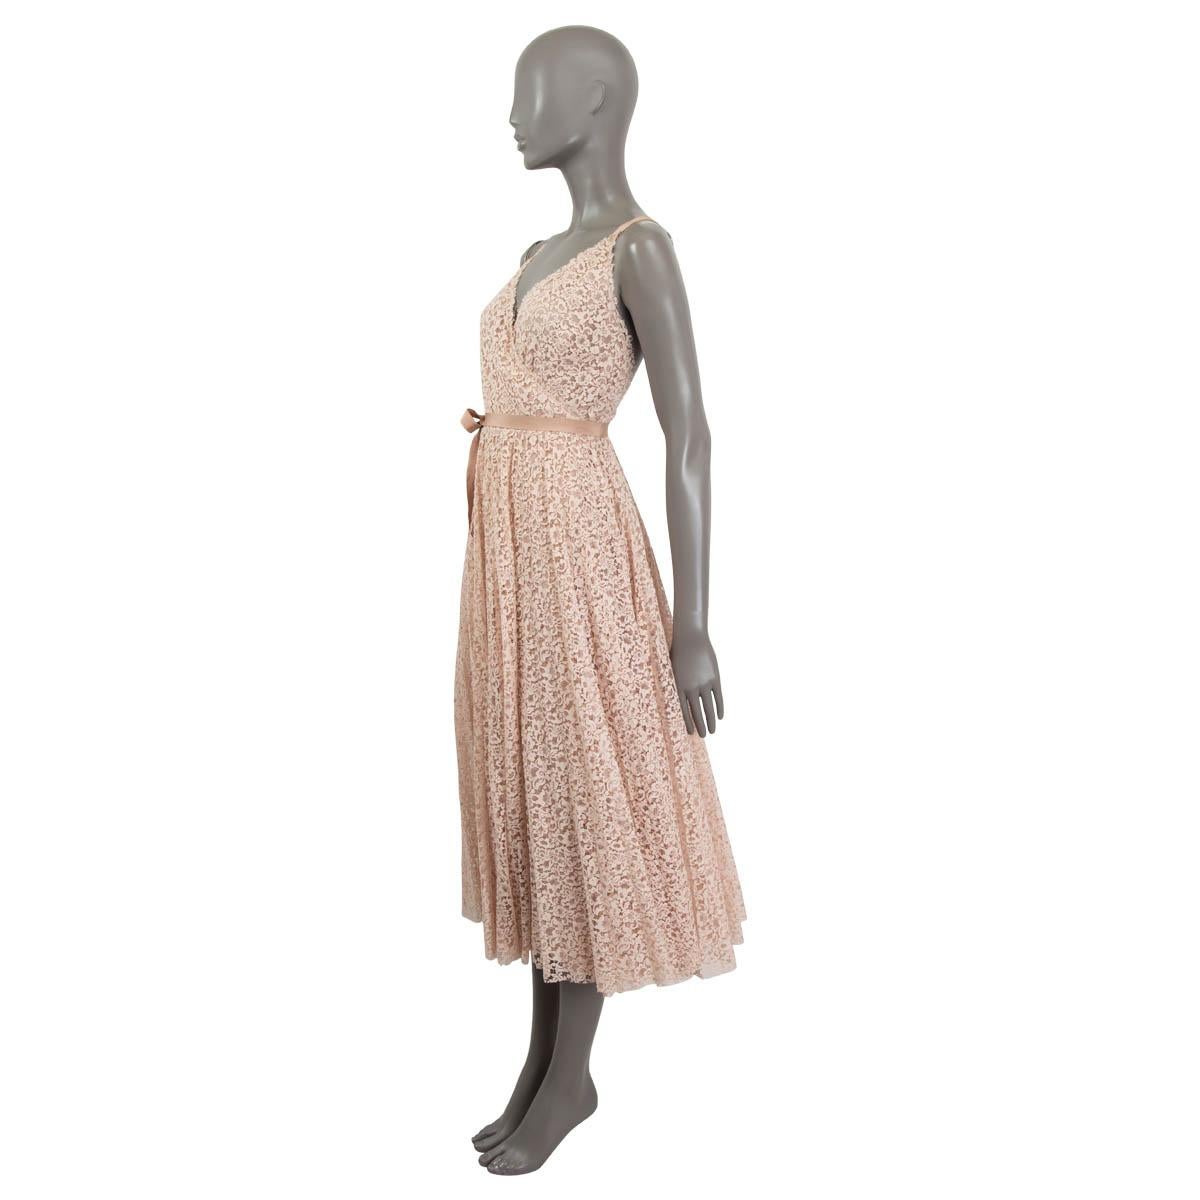 100% authentic Christian Dior Spring/Summer 2019 lace embellished wrap dress in dusty rose cotton (77%) and polyamide (23%). Features a deep v-neck and opens with a button and a belt at the front. Lined in dusty rose silk (100%). Has been worn once